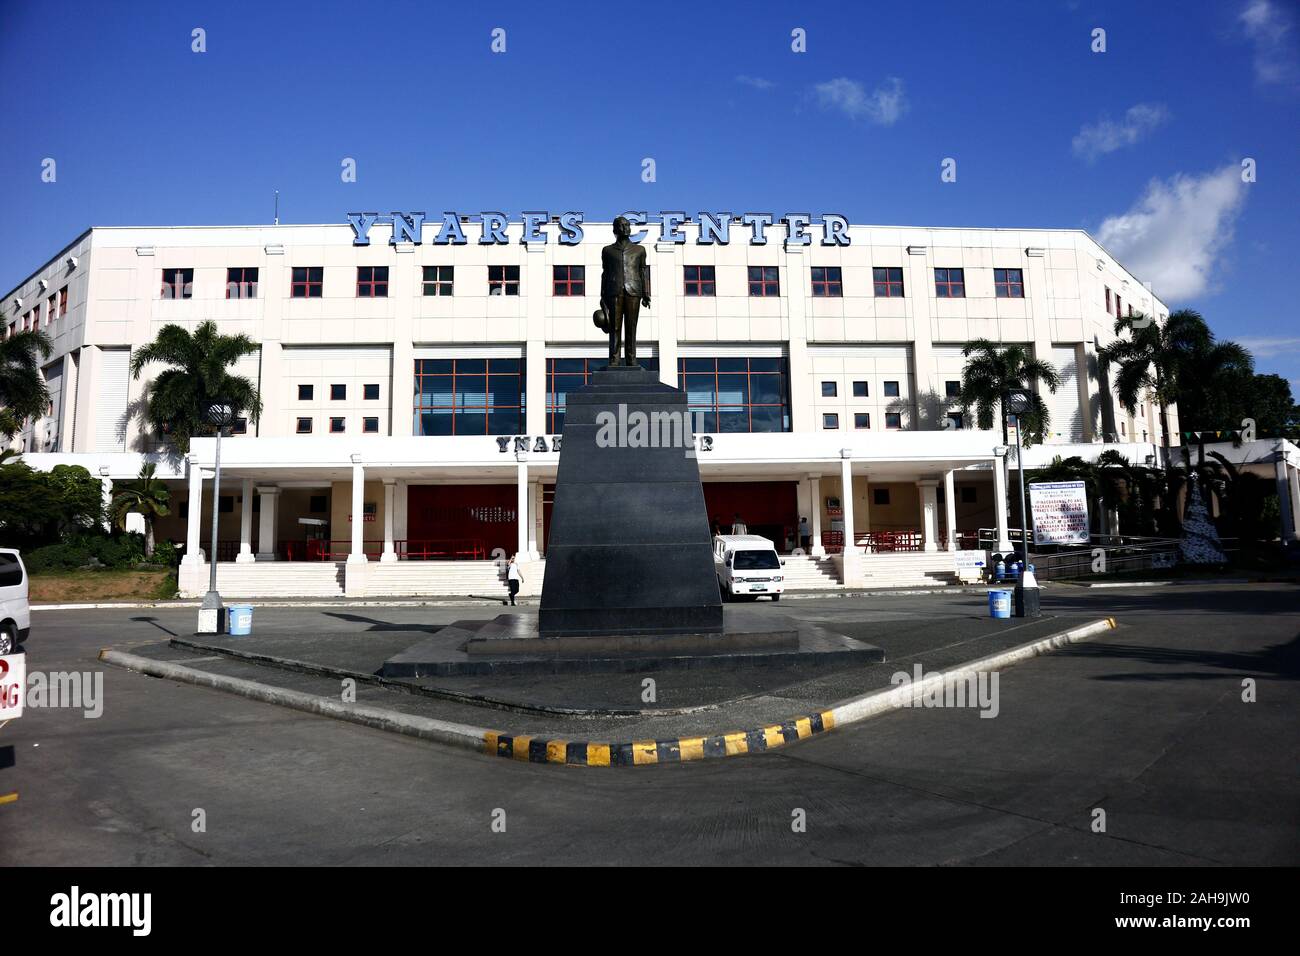 Antipolo City, Philippines – December 19, 2019: Facade of the Ynares Center and a statue of Dr. Jose Rizal in the provincial capitol ground in Antipol Stock Photo